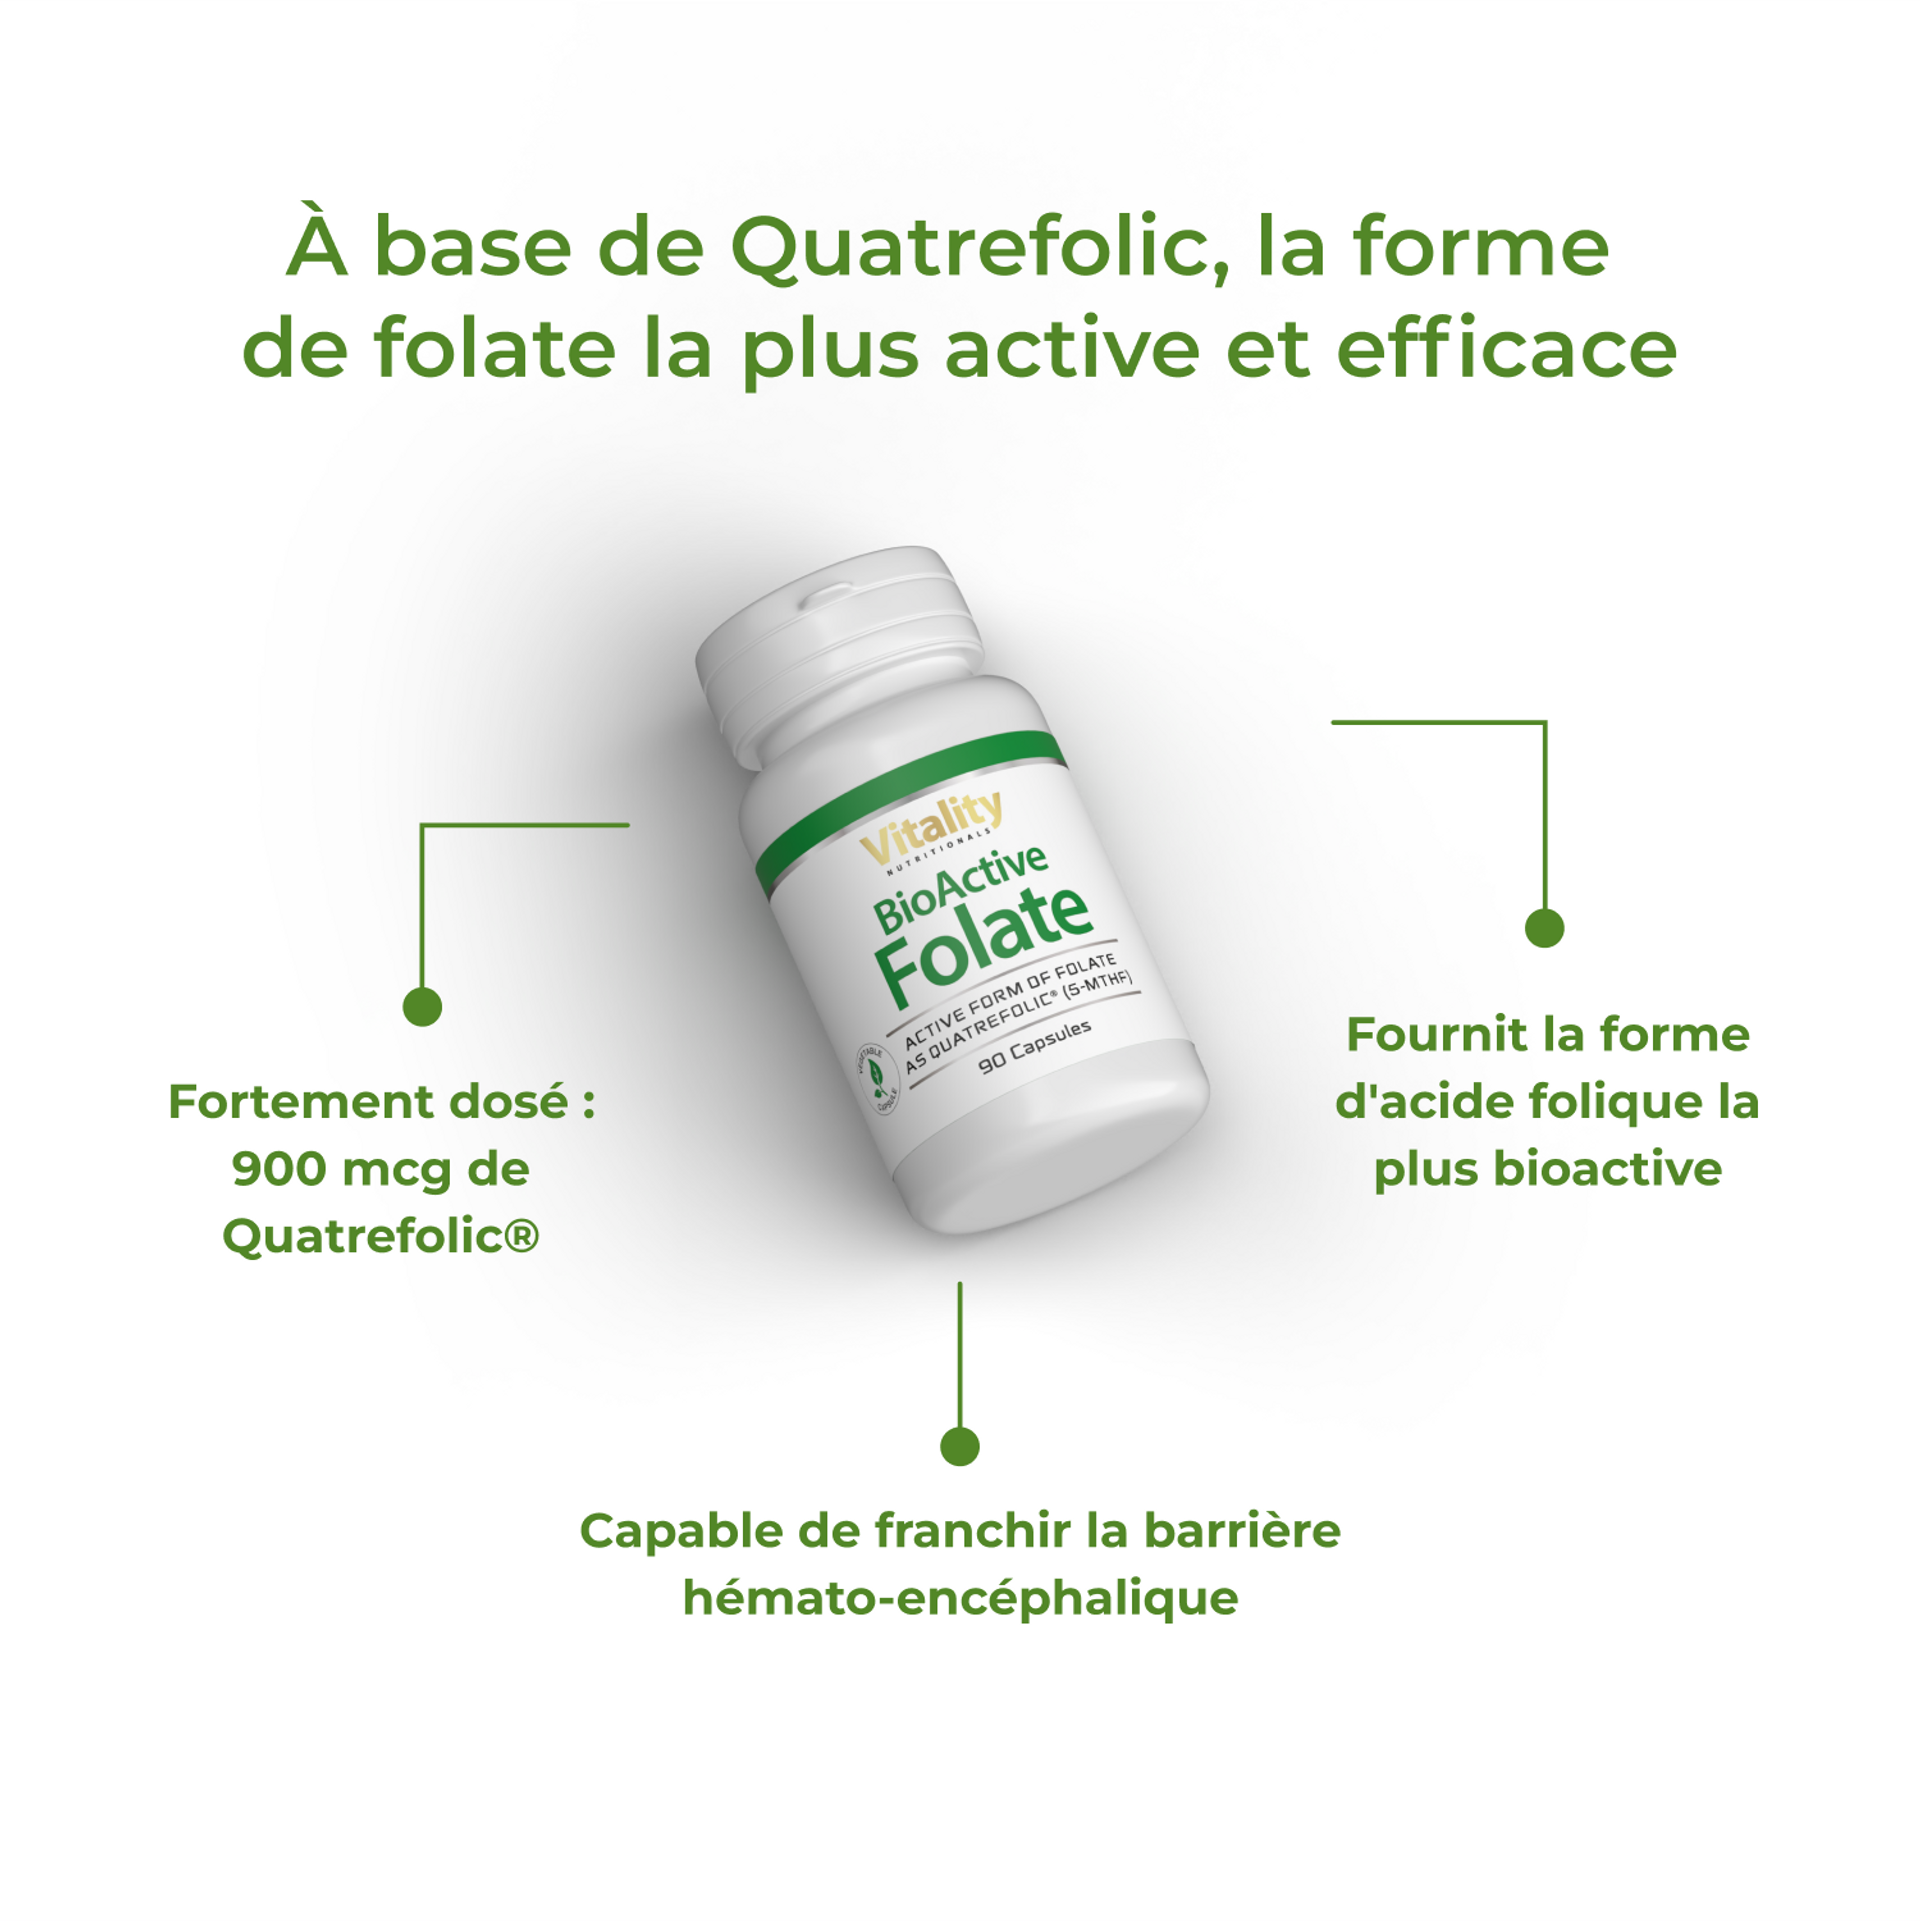 3_FR_Benefits_Bioactive Folate_6819-13.png